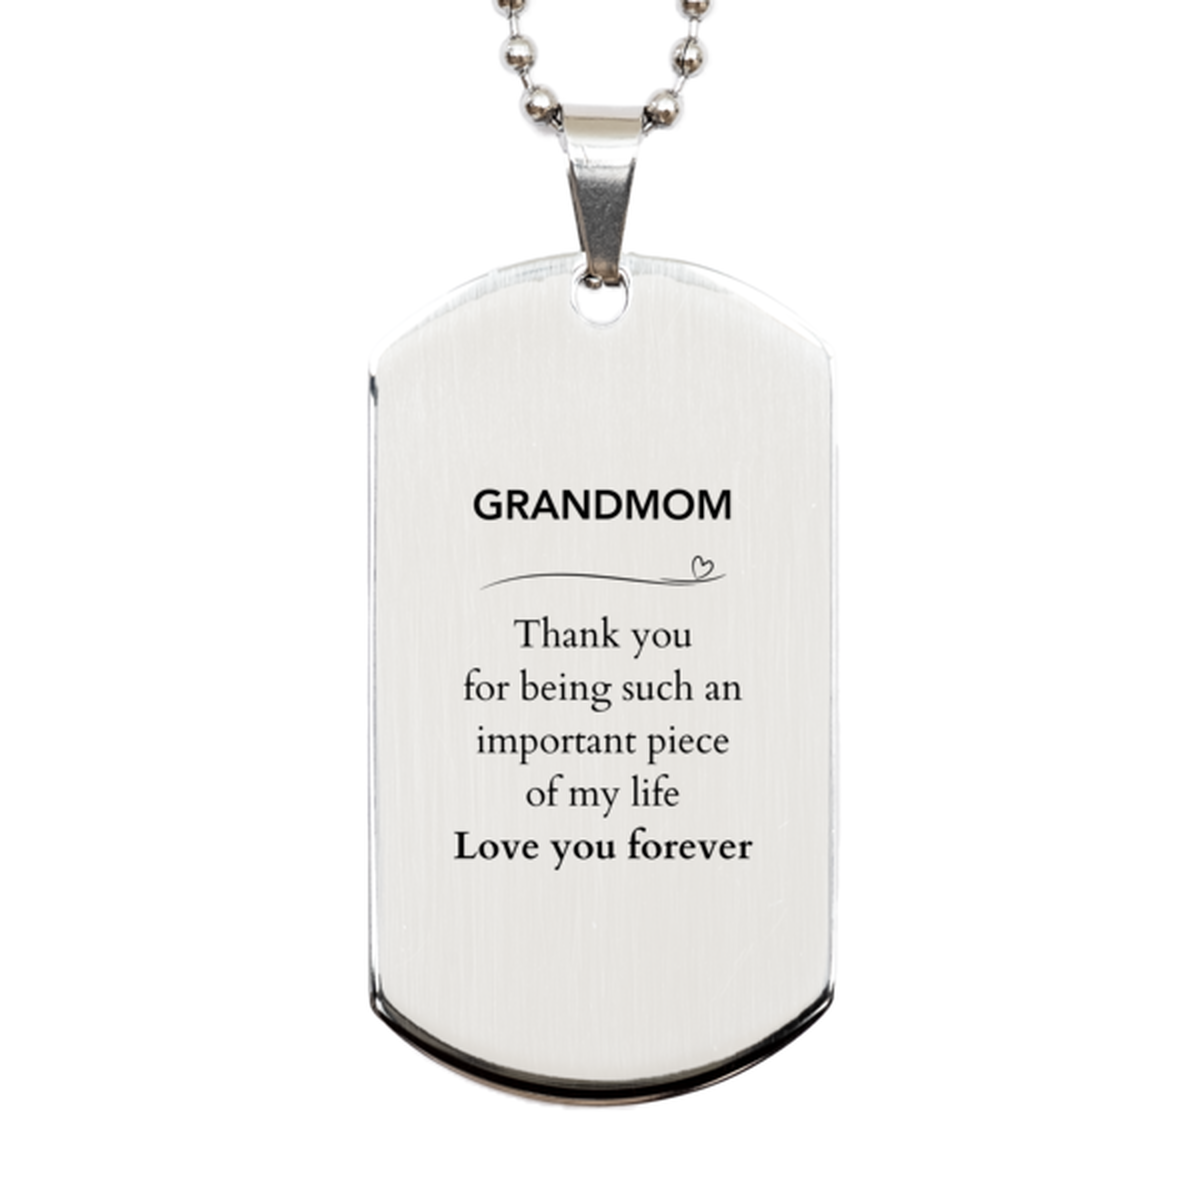 Appropriate Grandmom Silver Dog Tag Epic Birthday Gifts for Grandmom Thank you for being such an important piece of my life Grandmom Christmas Mothers Fathers Day